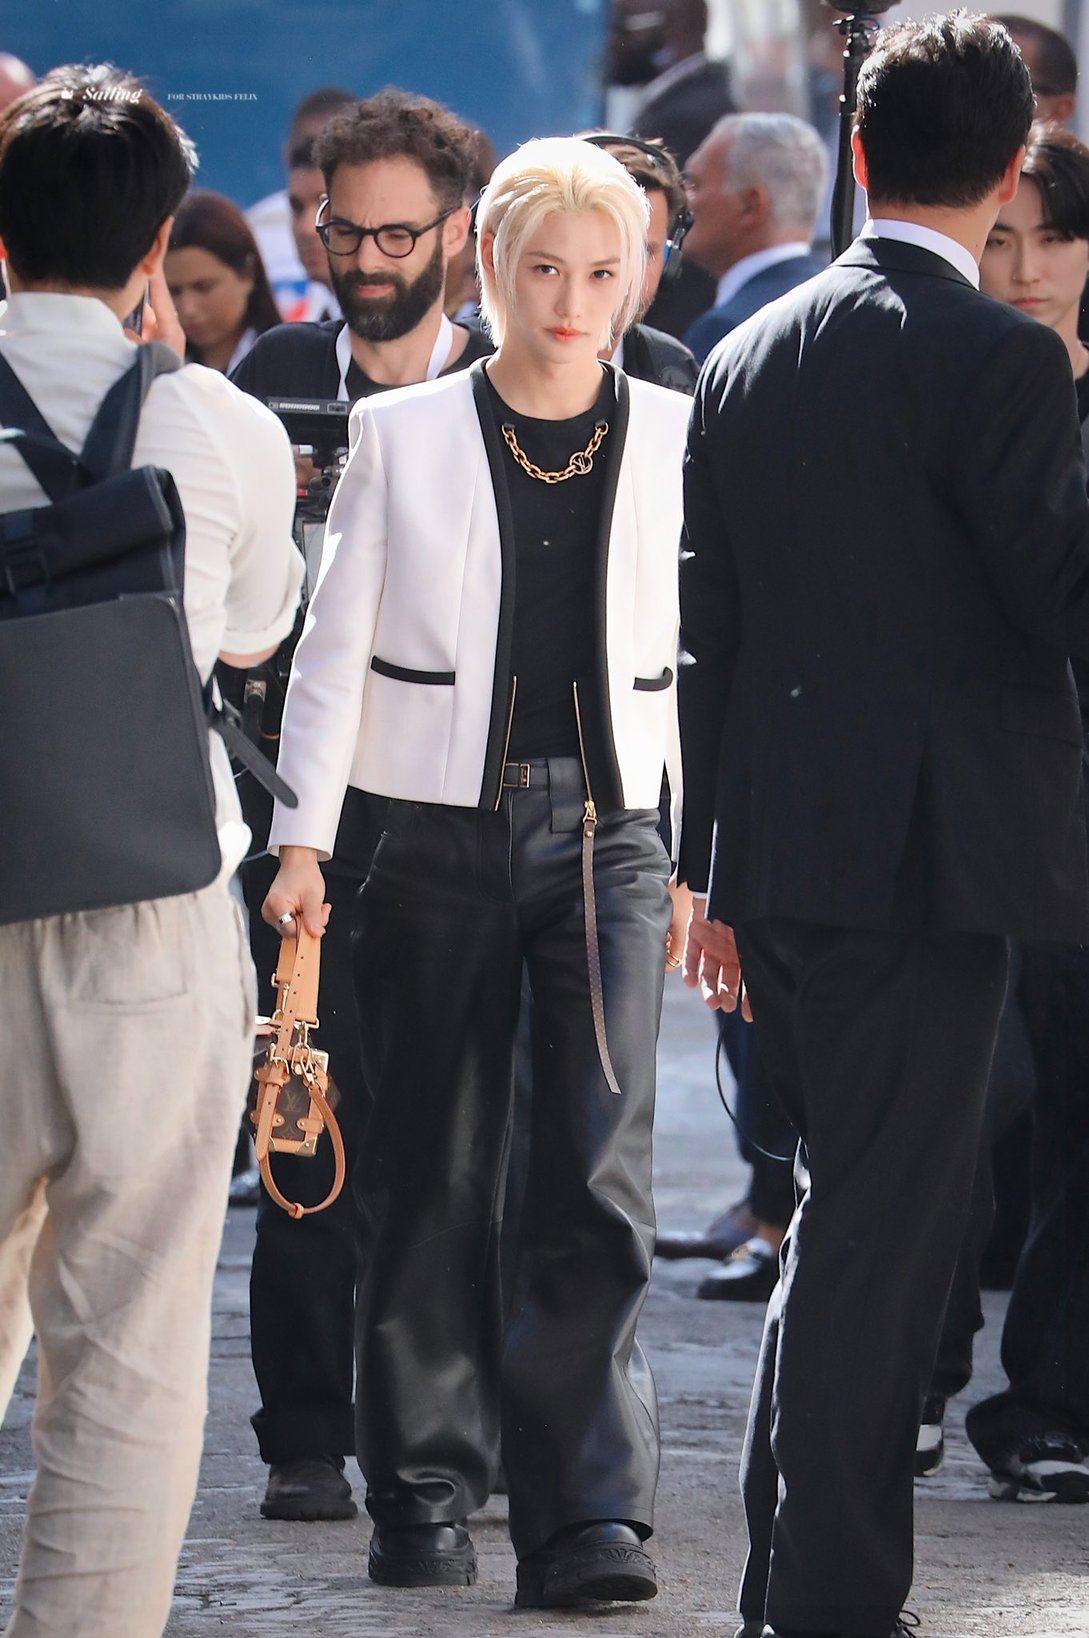 Viral Takes on X: Felix of Stray Kids is now confirmed to be attending the Louis  Vuitton show at Paris Fashion Week on 2nd October.   / X